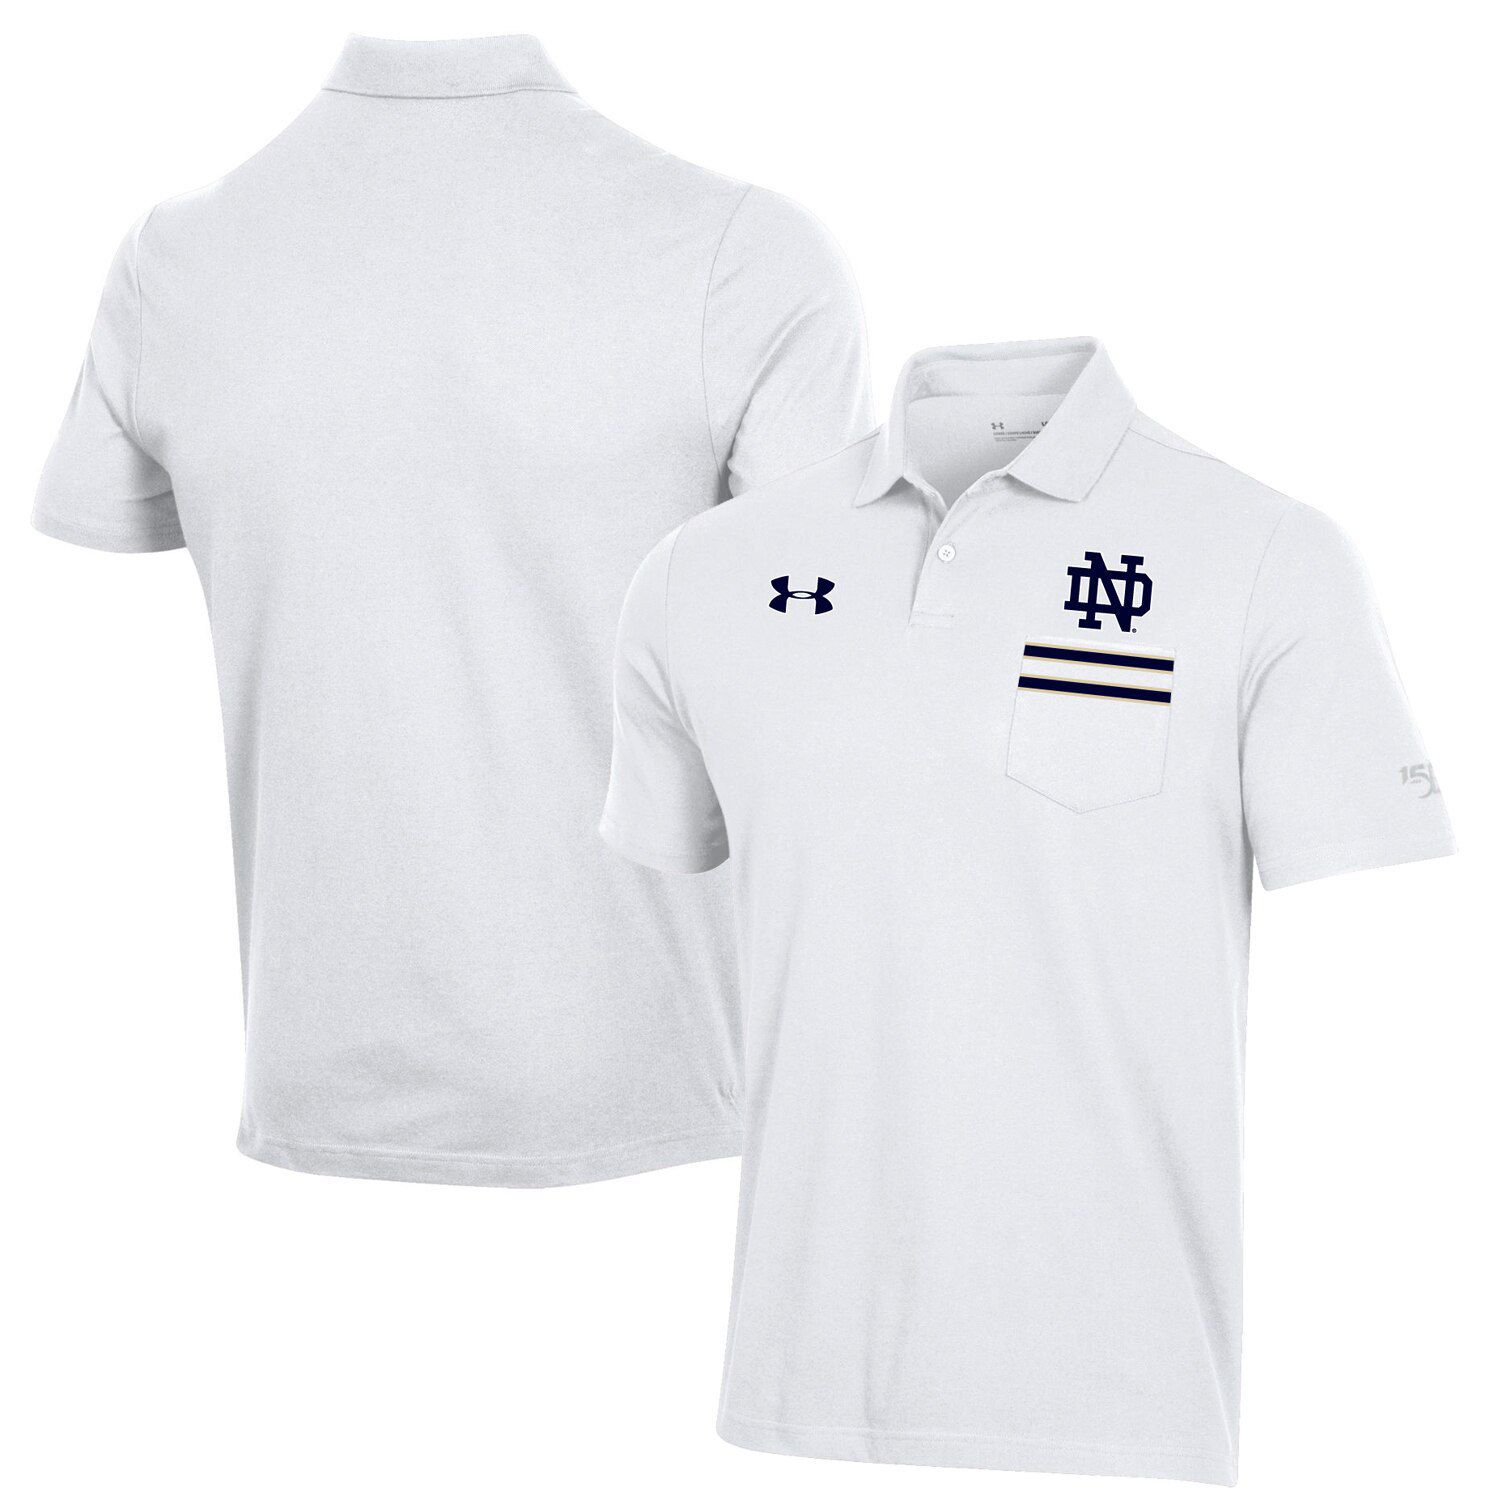 under armour polo with pocket